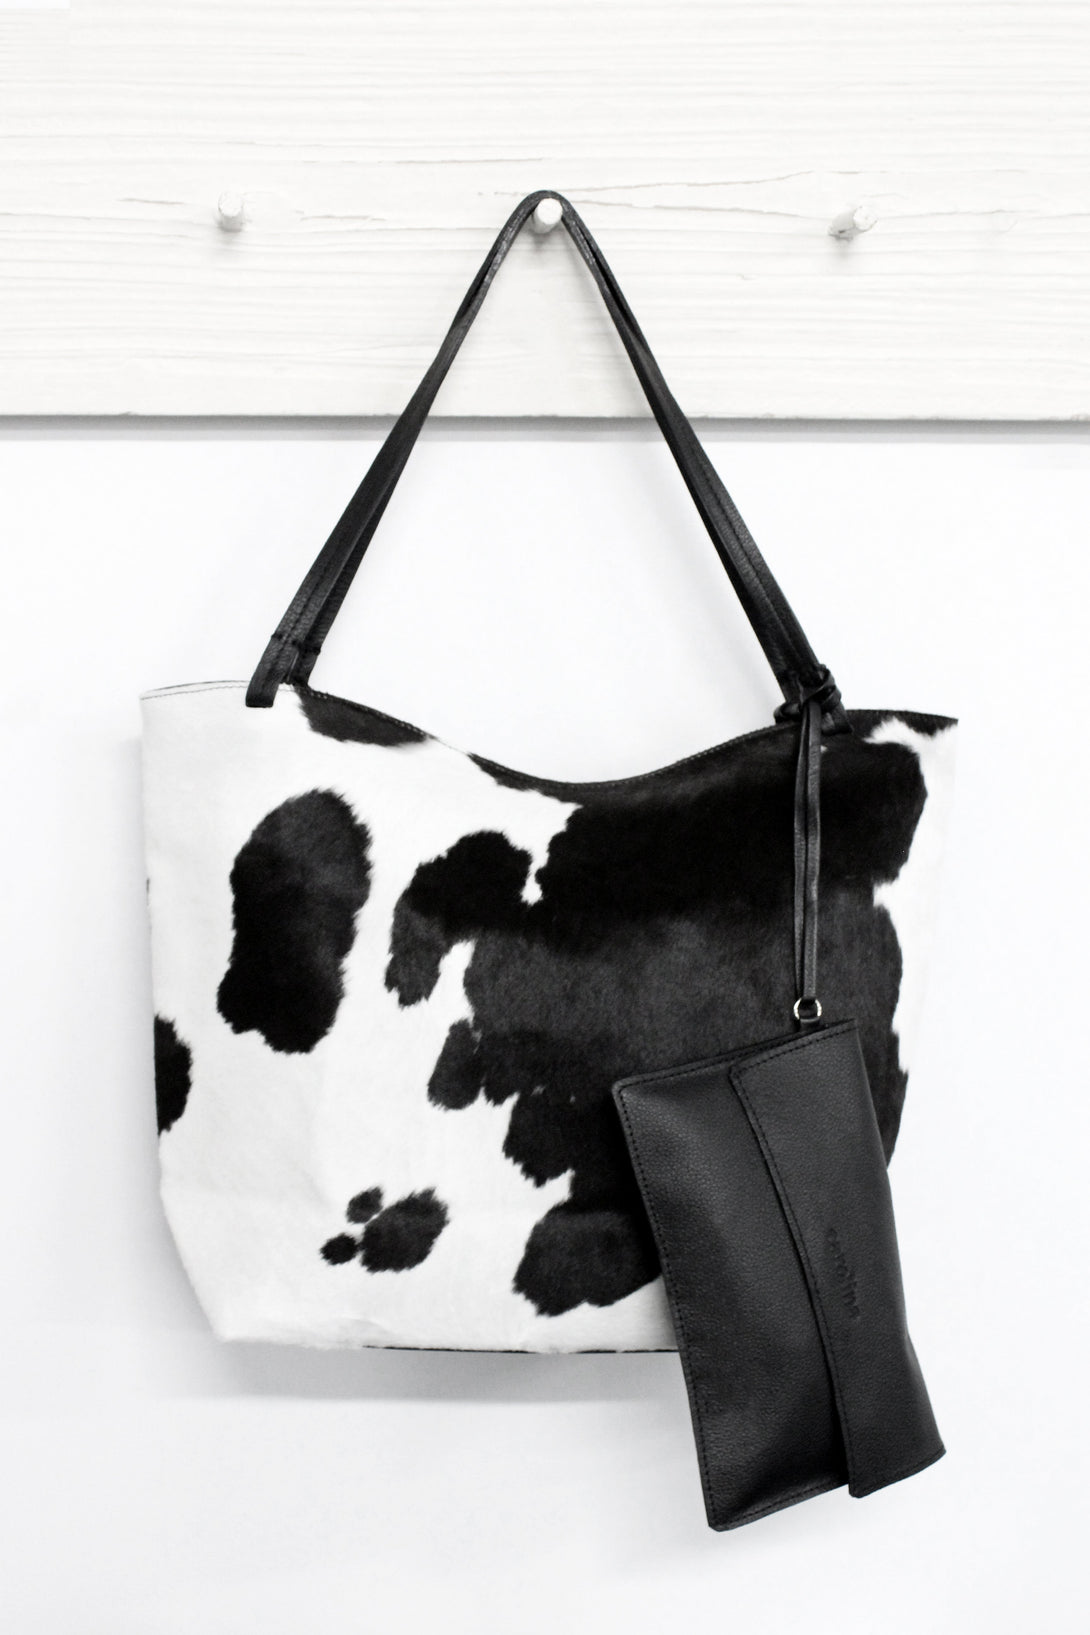 Nora Leather Handbag Black and White Cowhide Leather